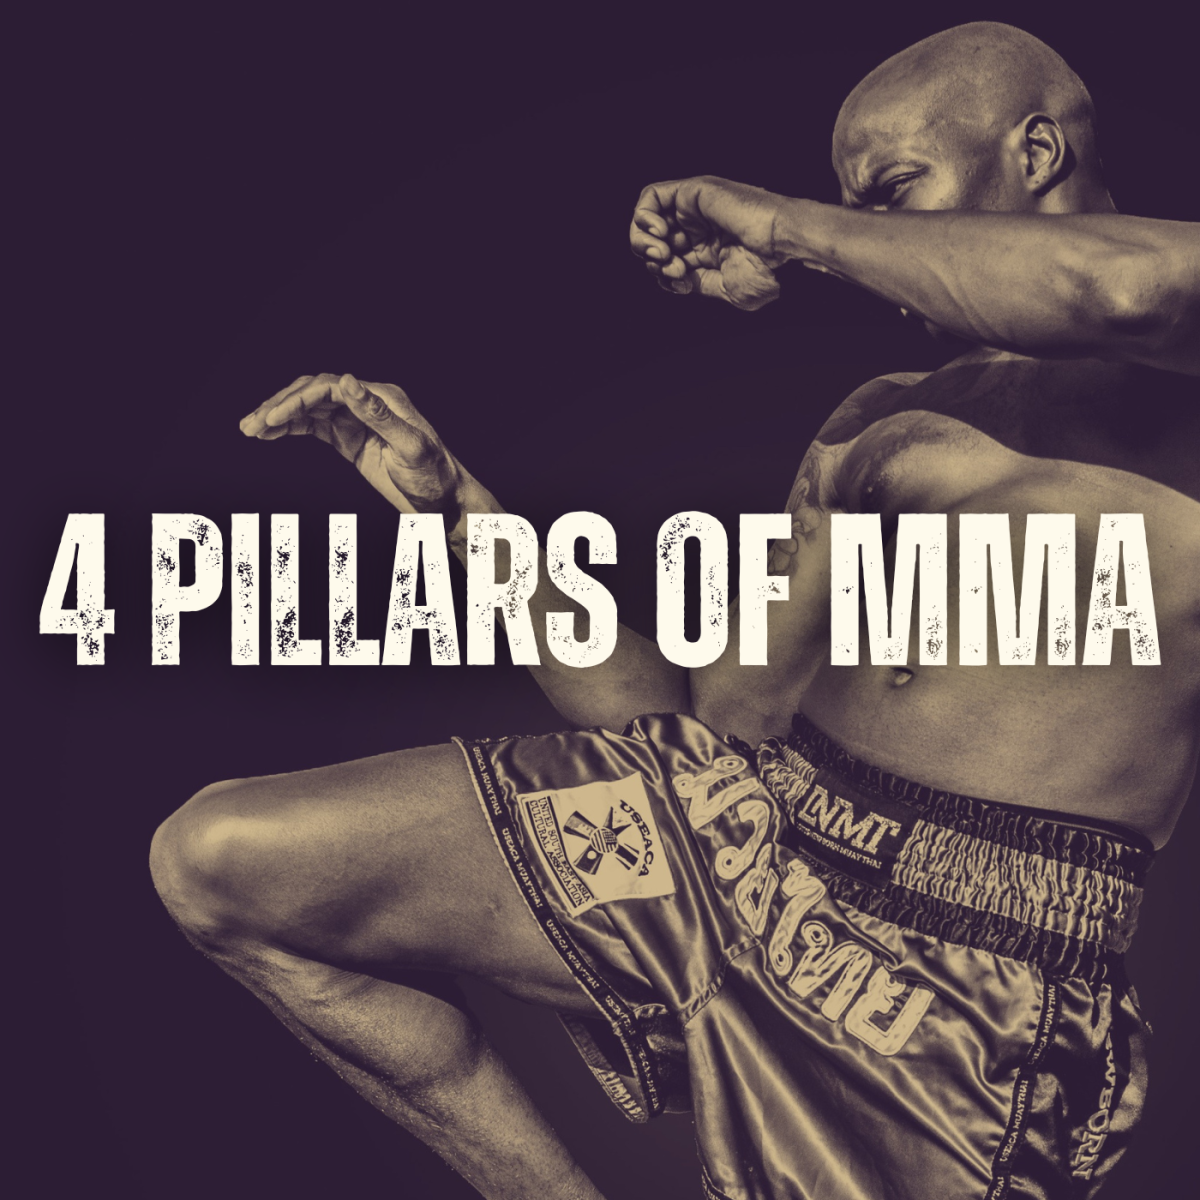 The four staple styles in mixed martial arts are boxing, wrestling, Brazilian jiu-jitsu or submission wrestling, and muay Thai or kickboxing. Learn more about these disciplines and their importance in MMA.